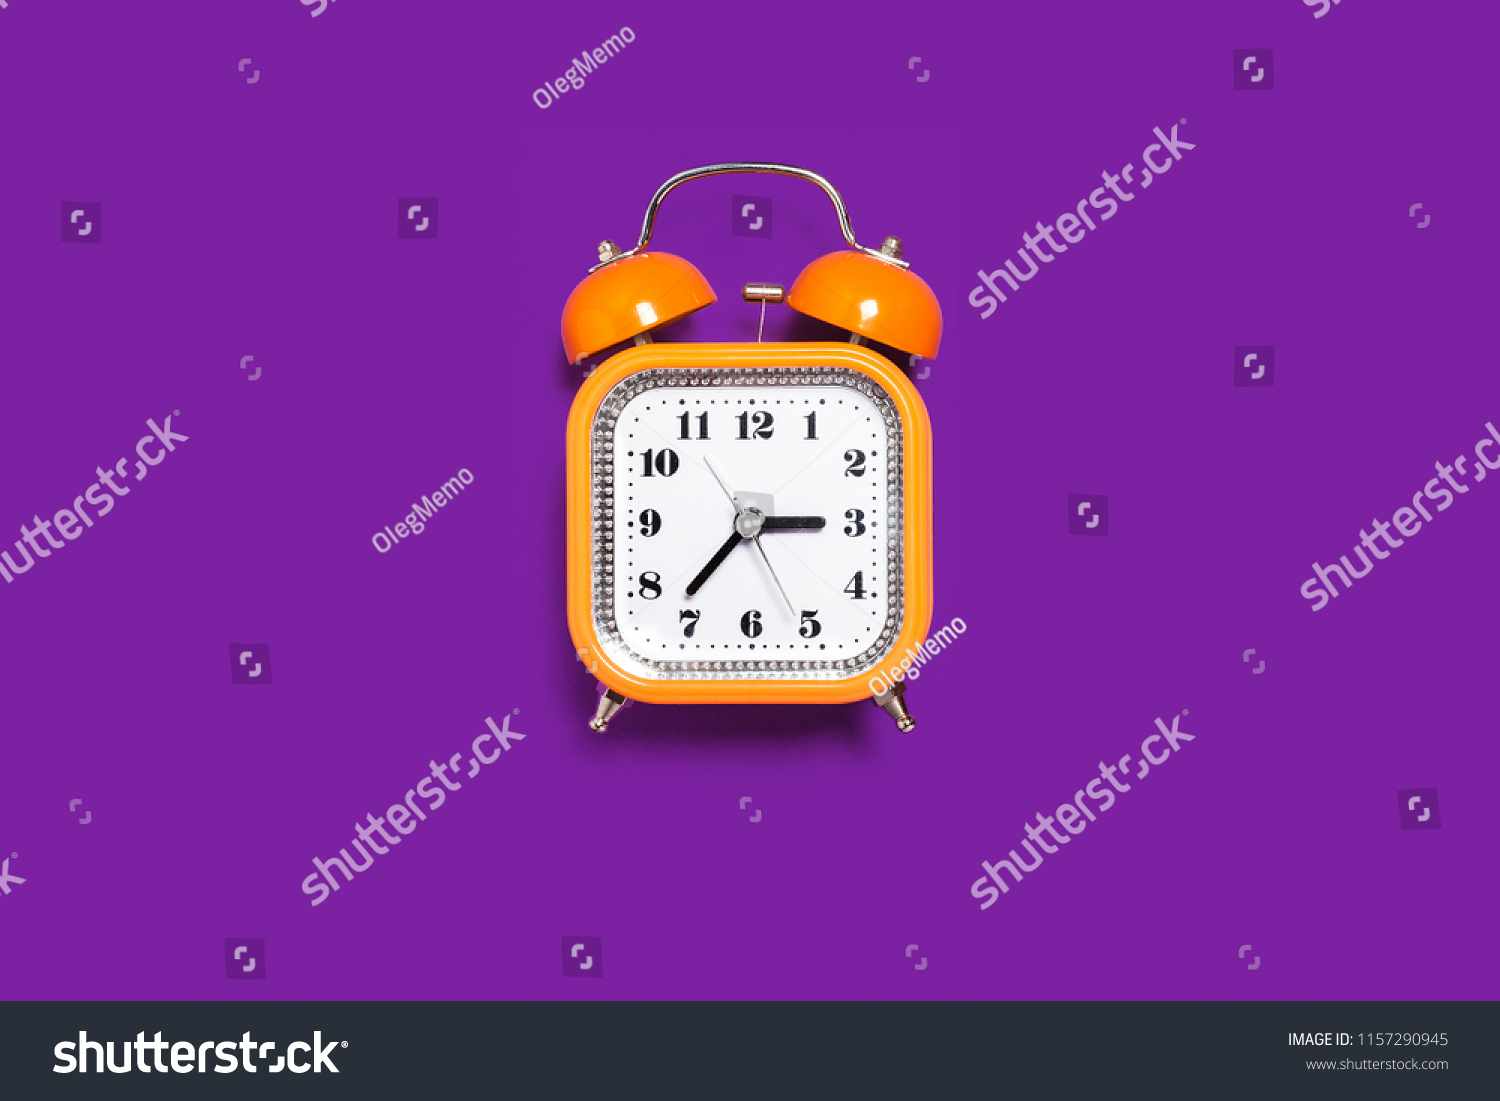 Vintage style orange metal alarm clock with bells standing on the purple surface isolated. back to school concept. free space for text #1157290945